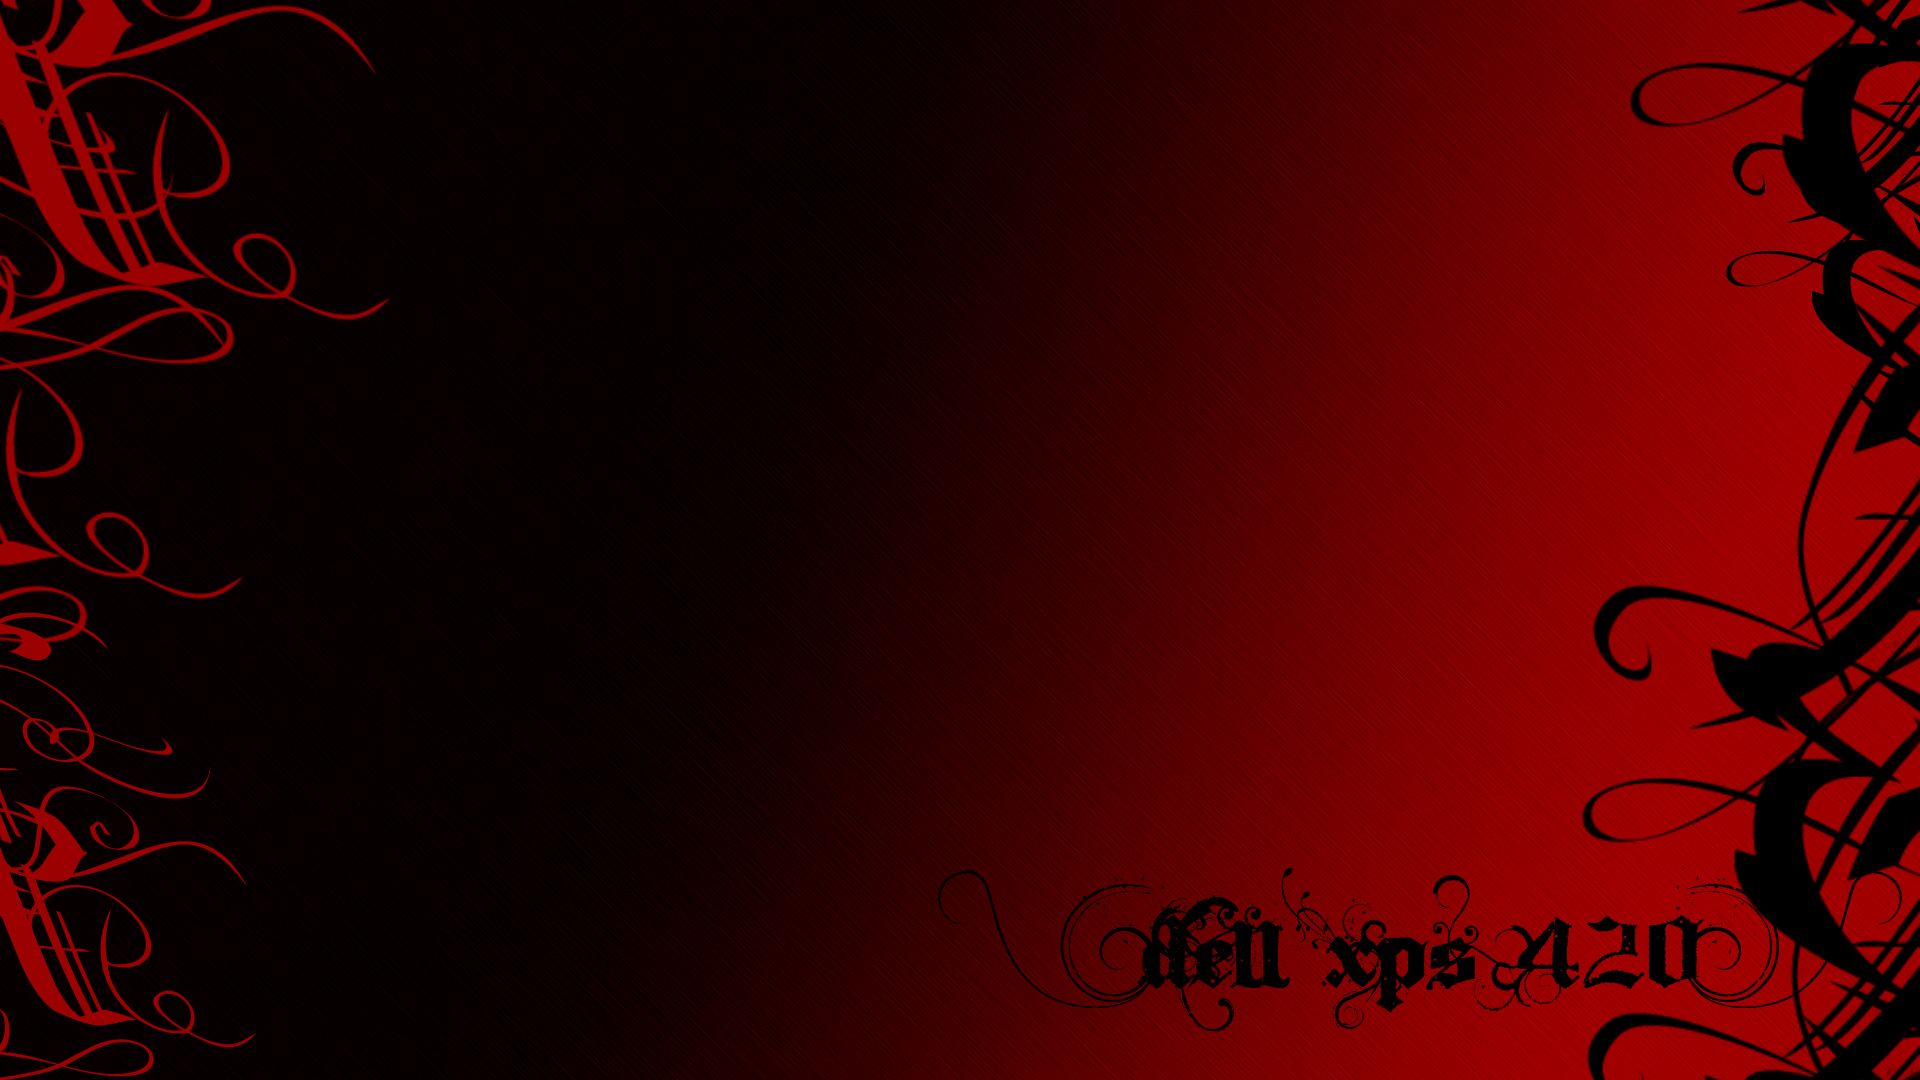 HD Dell Background Wallpaper Image For Windows